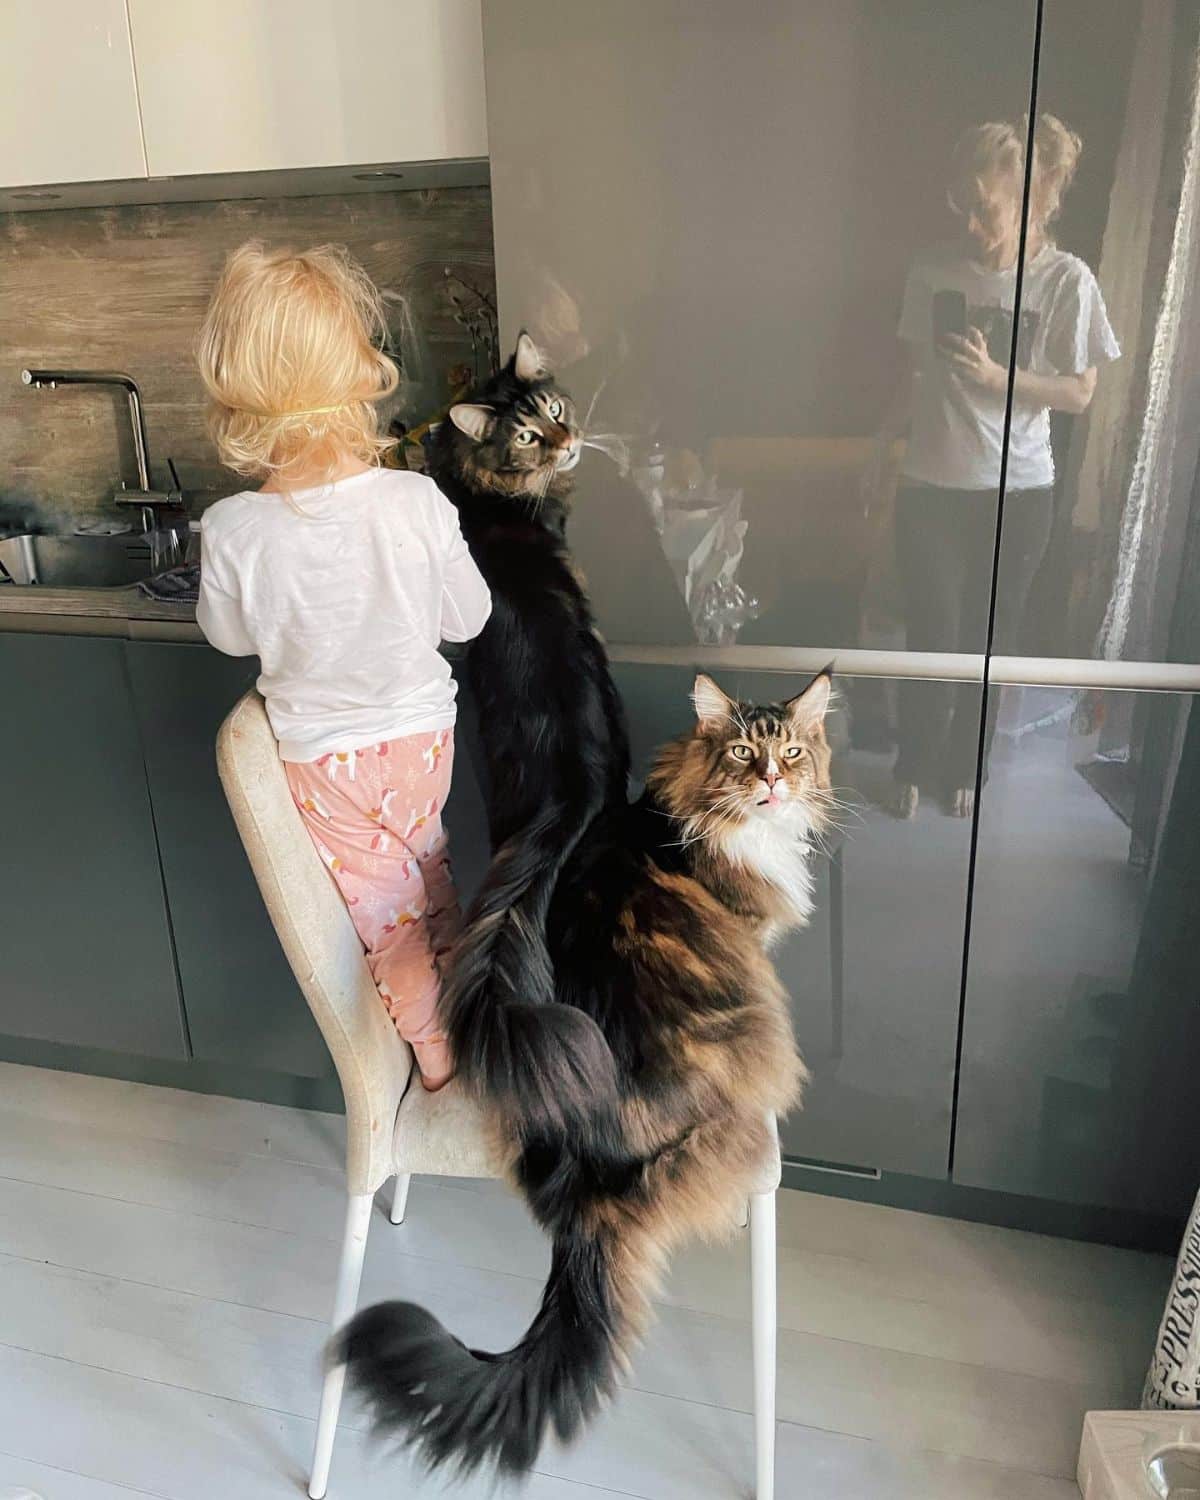 A young kid with two brown maine coons sitting and standing on a chair in a kitchen.